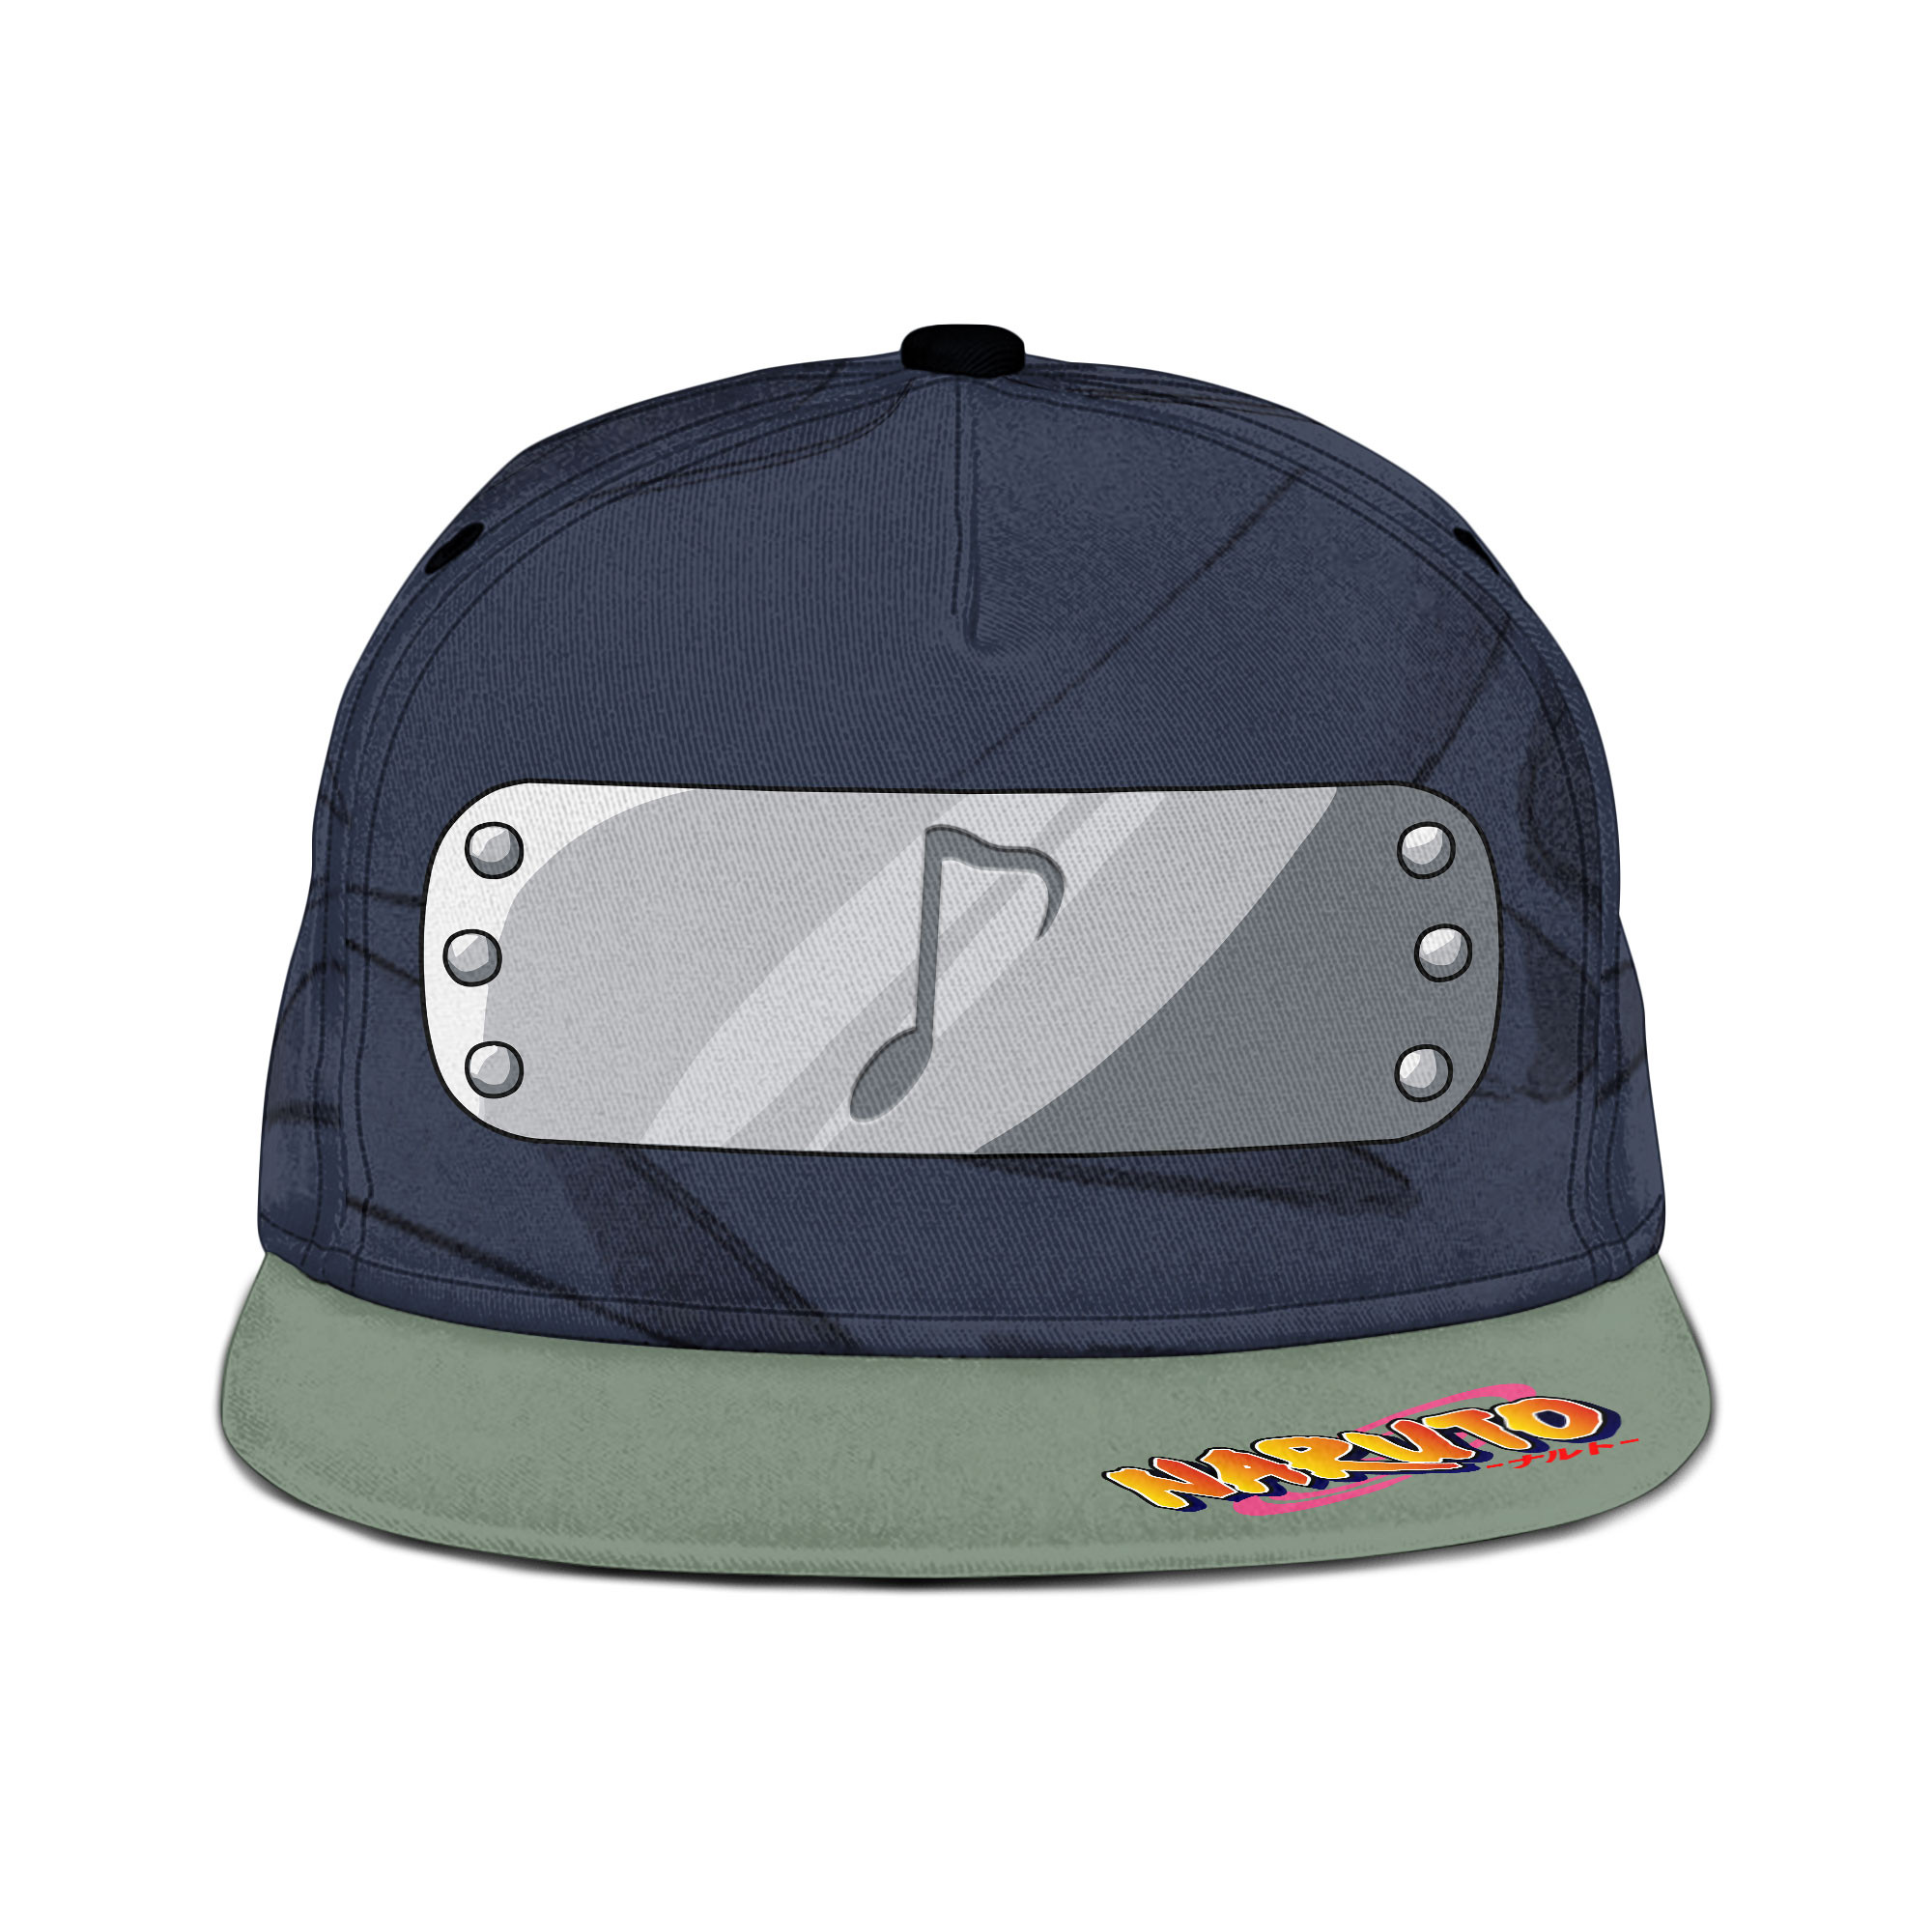 If you're looking to buy new snapback cap, here's what you need to know! 121